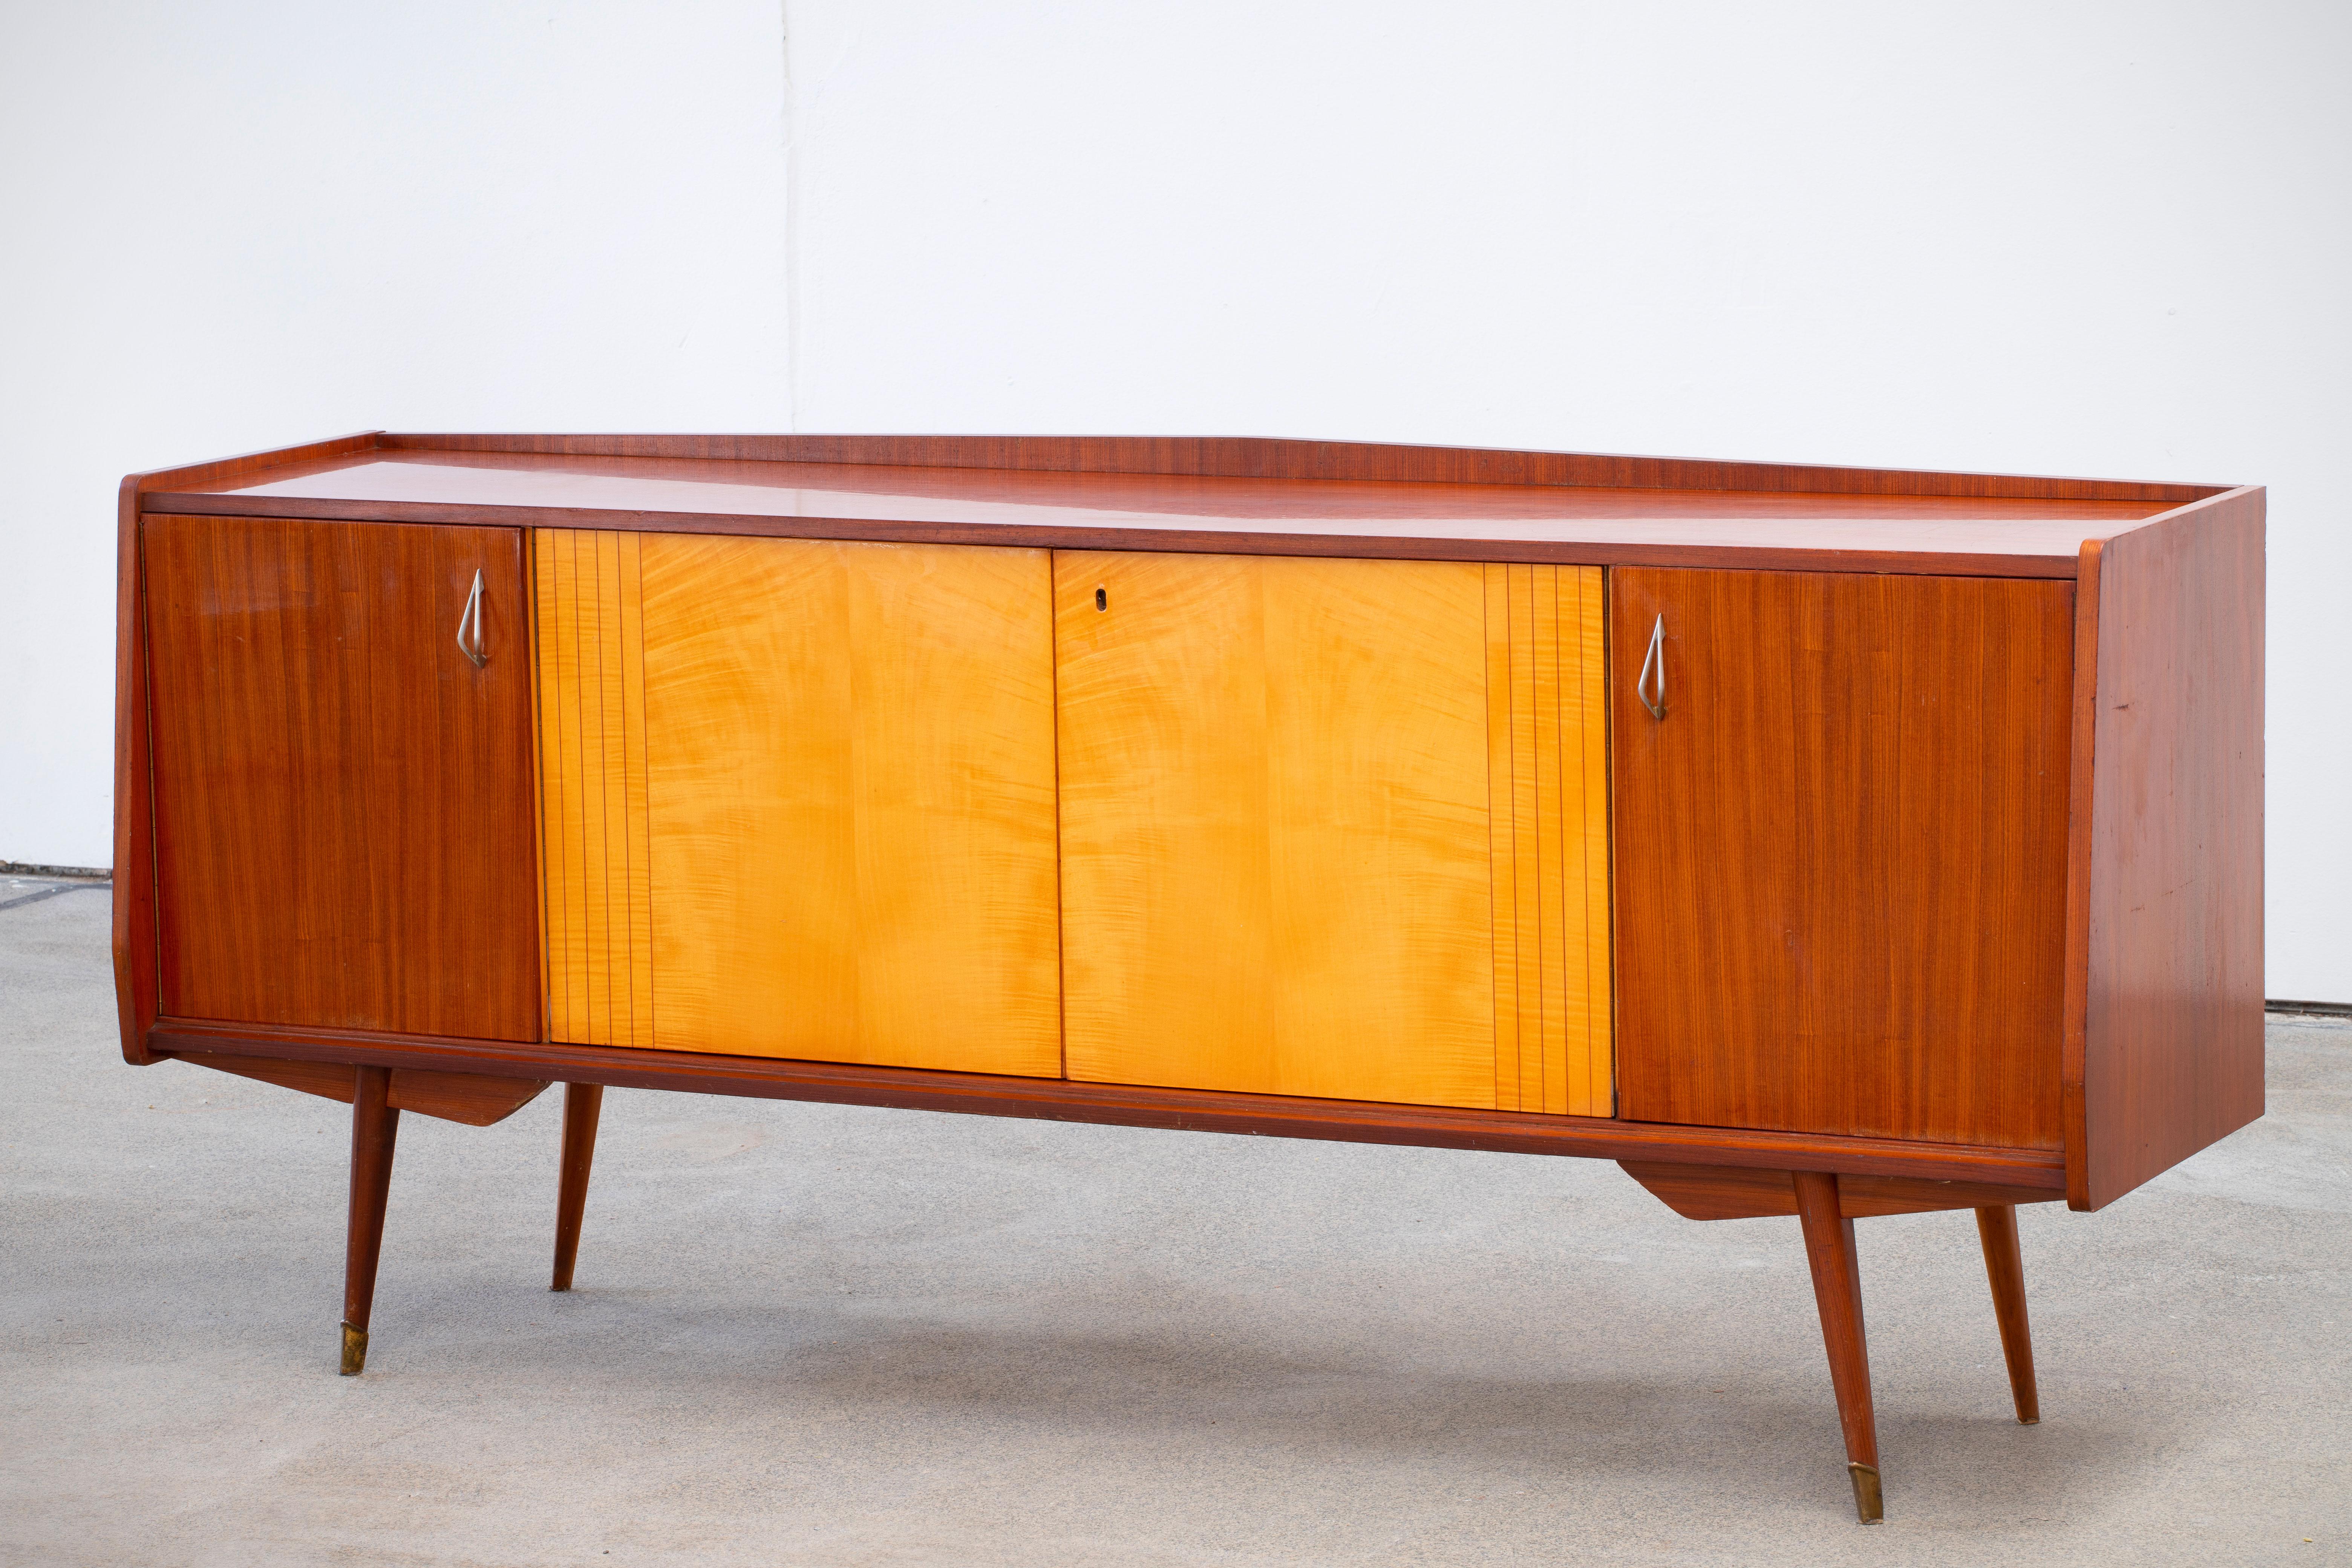 Veneer 1950 French Credenza in Walnut and Maple